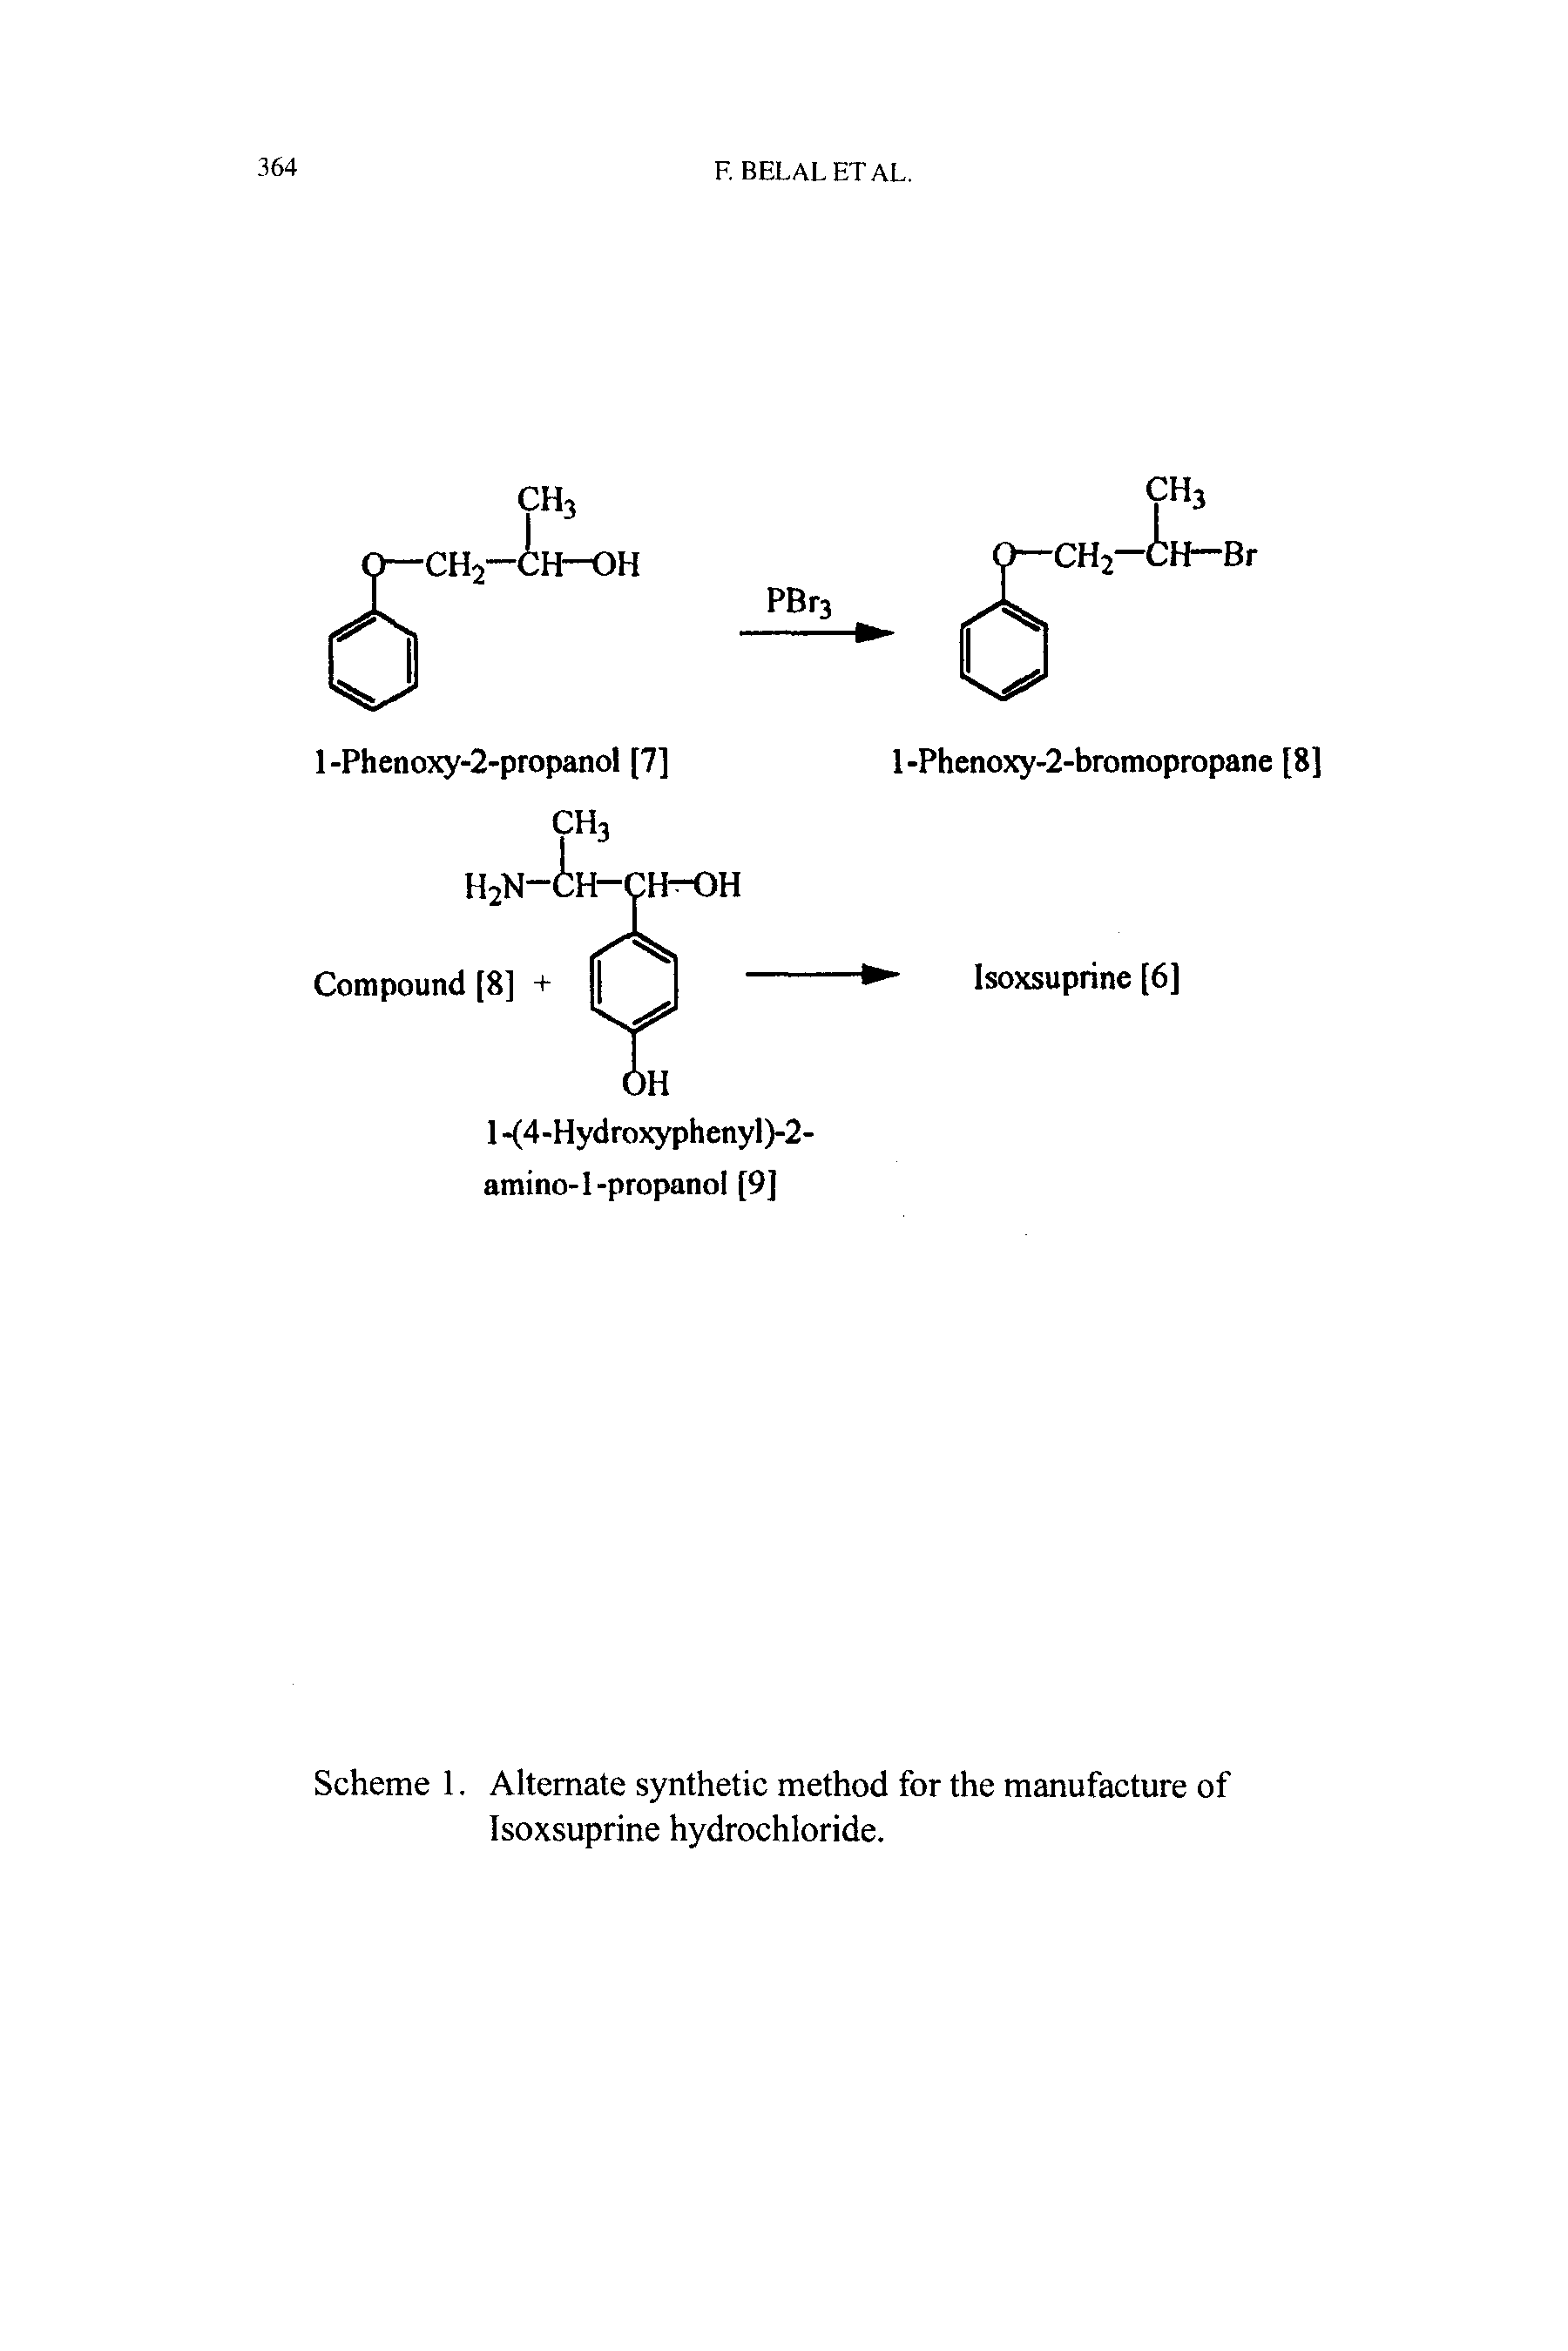 Scheme 1. Alternate synthetic method for the manufacture of Isoxsuprine hydrochloride.